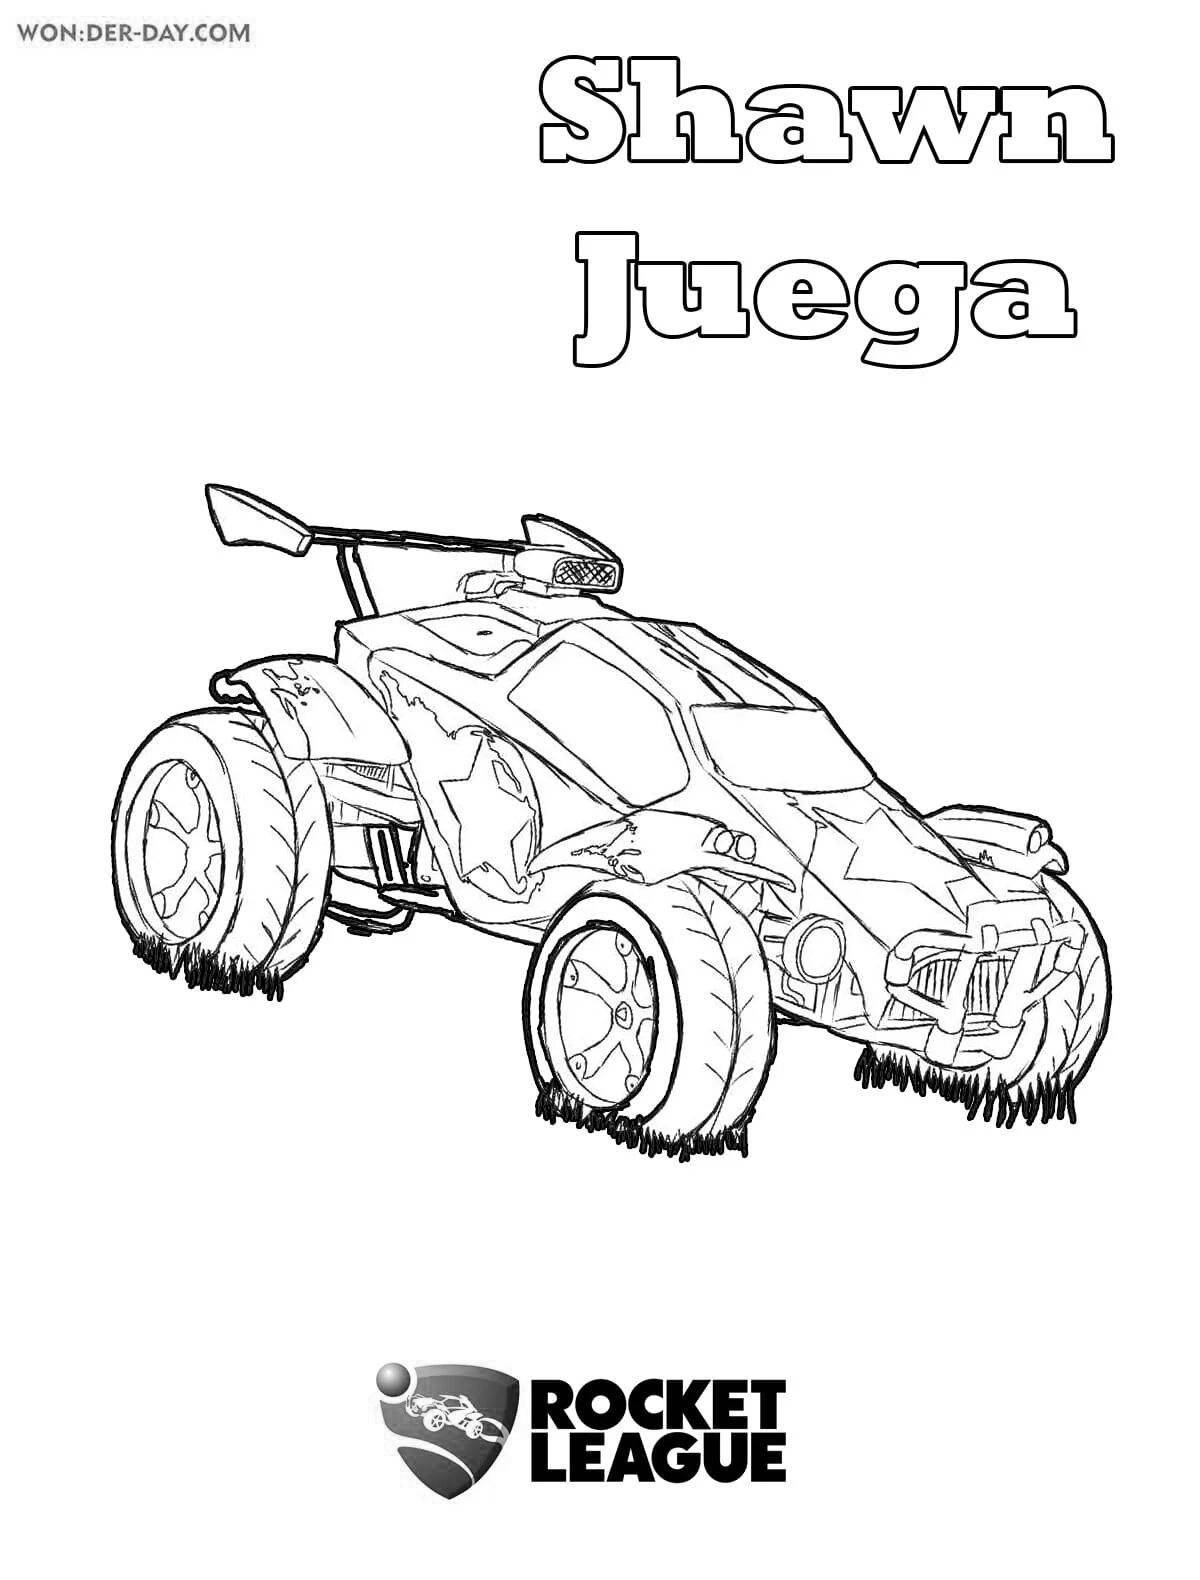 Rocket league animated coloring page